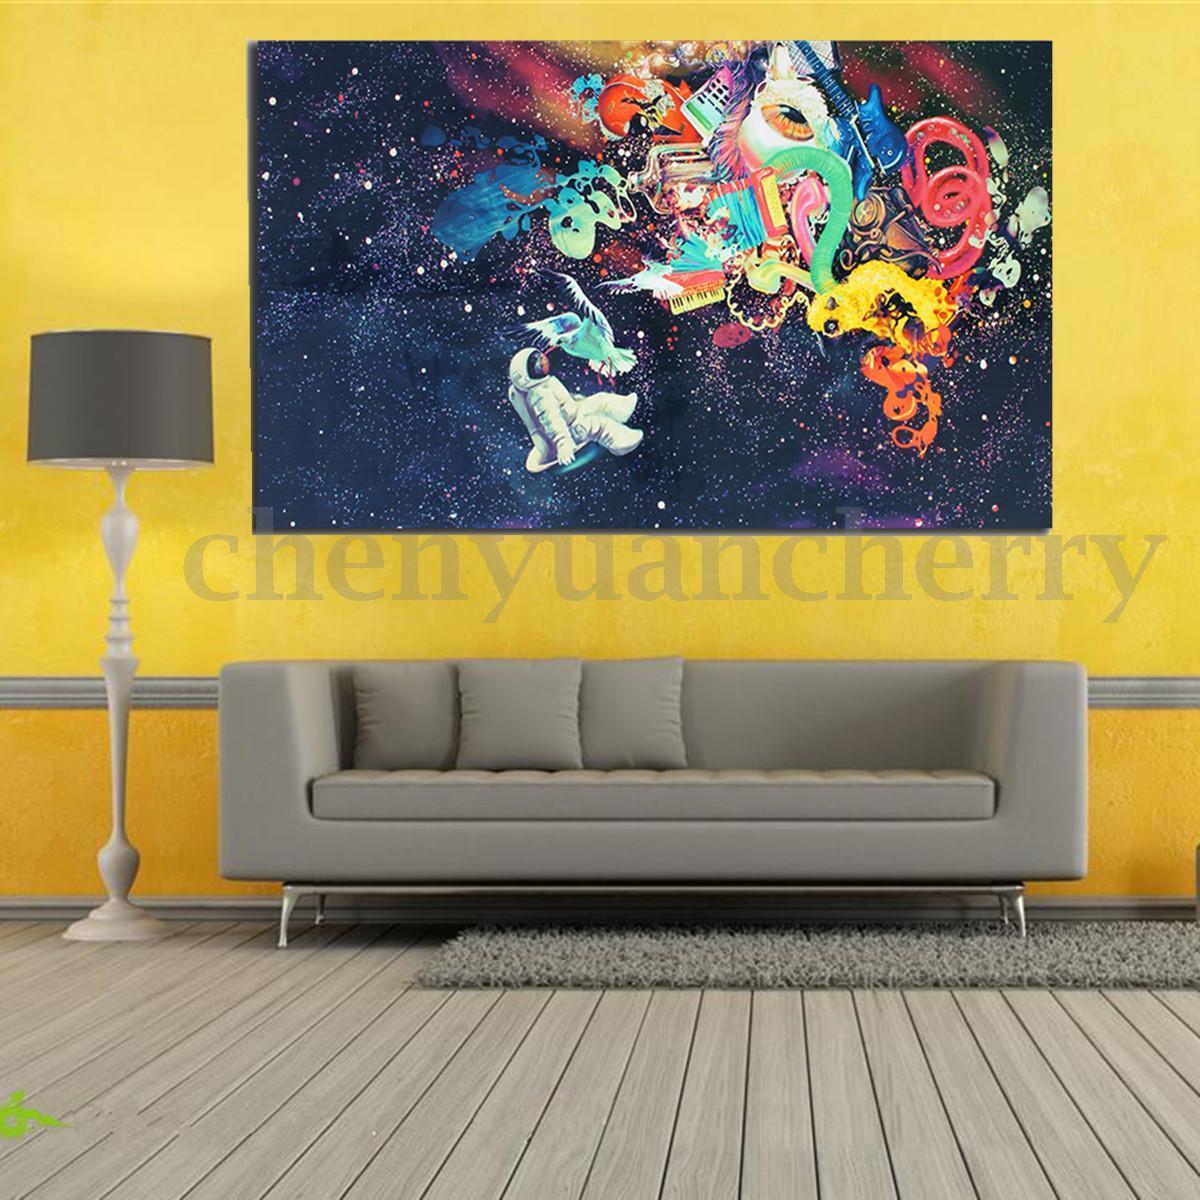 Psychedelic Trippy Modern Abstract Art Silk Fabric Cloth Poster Decor 36x24"